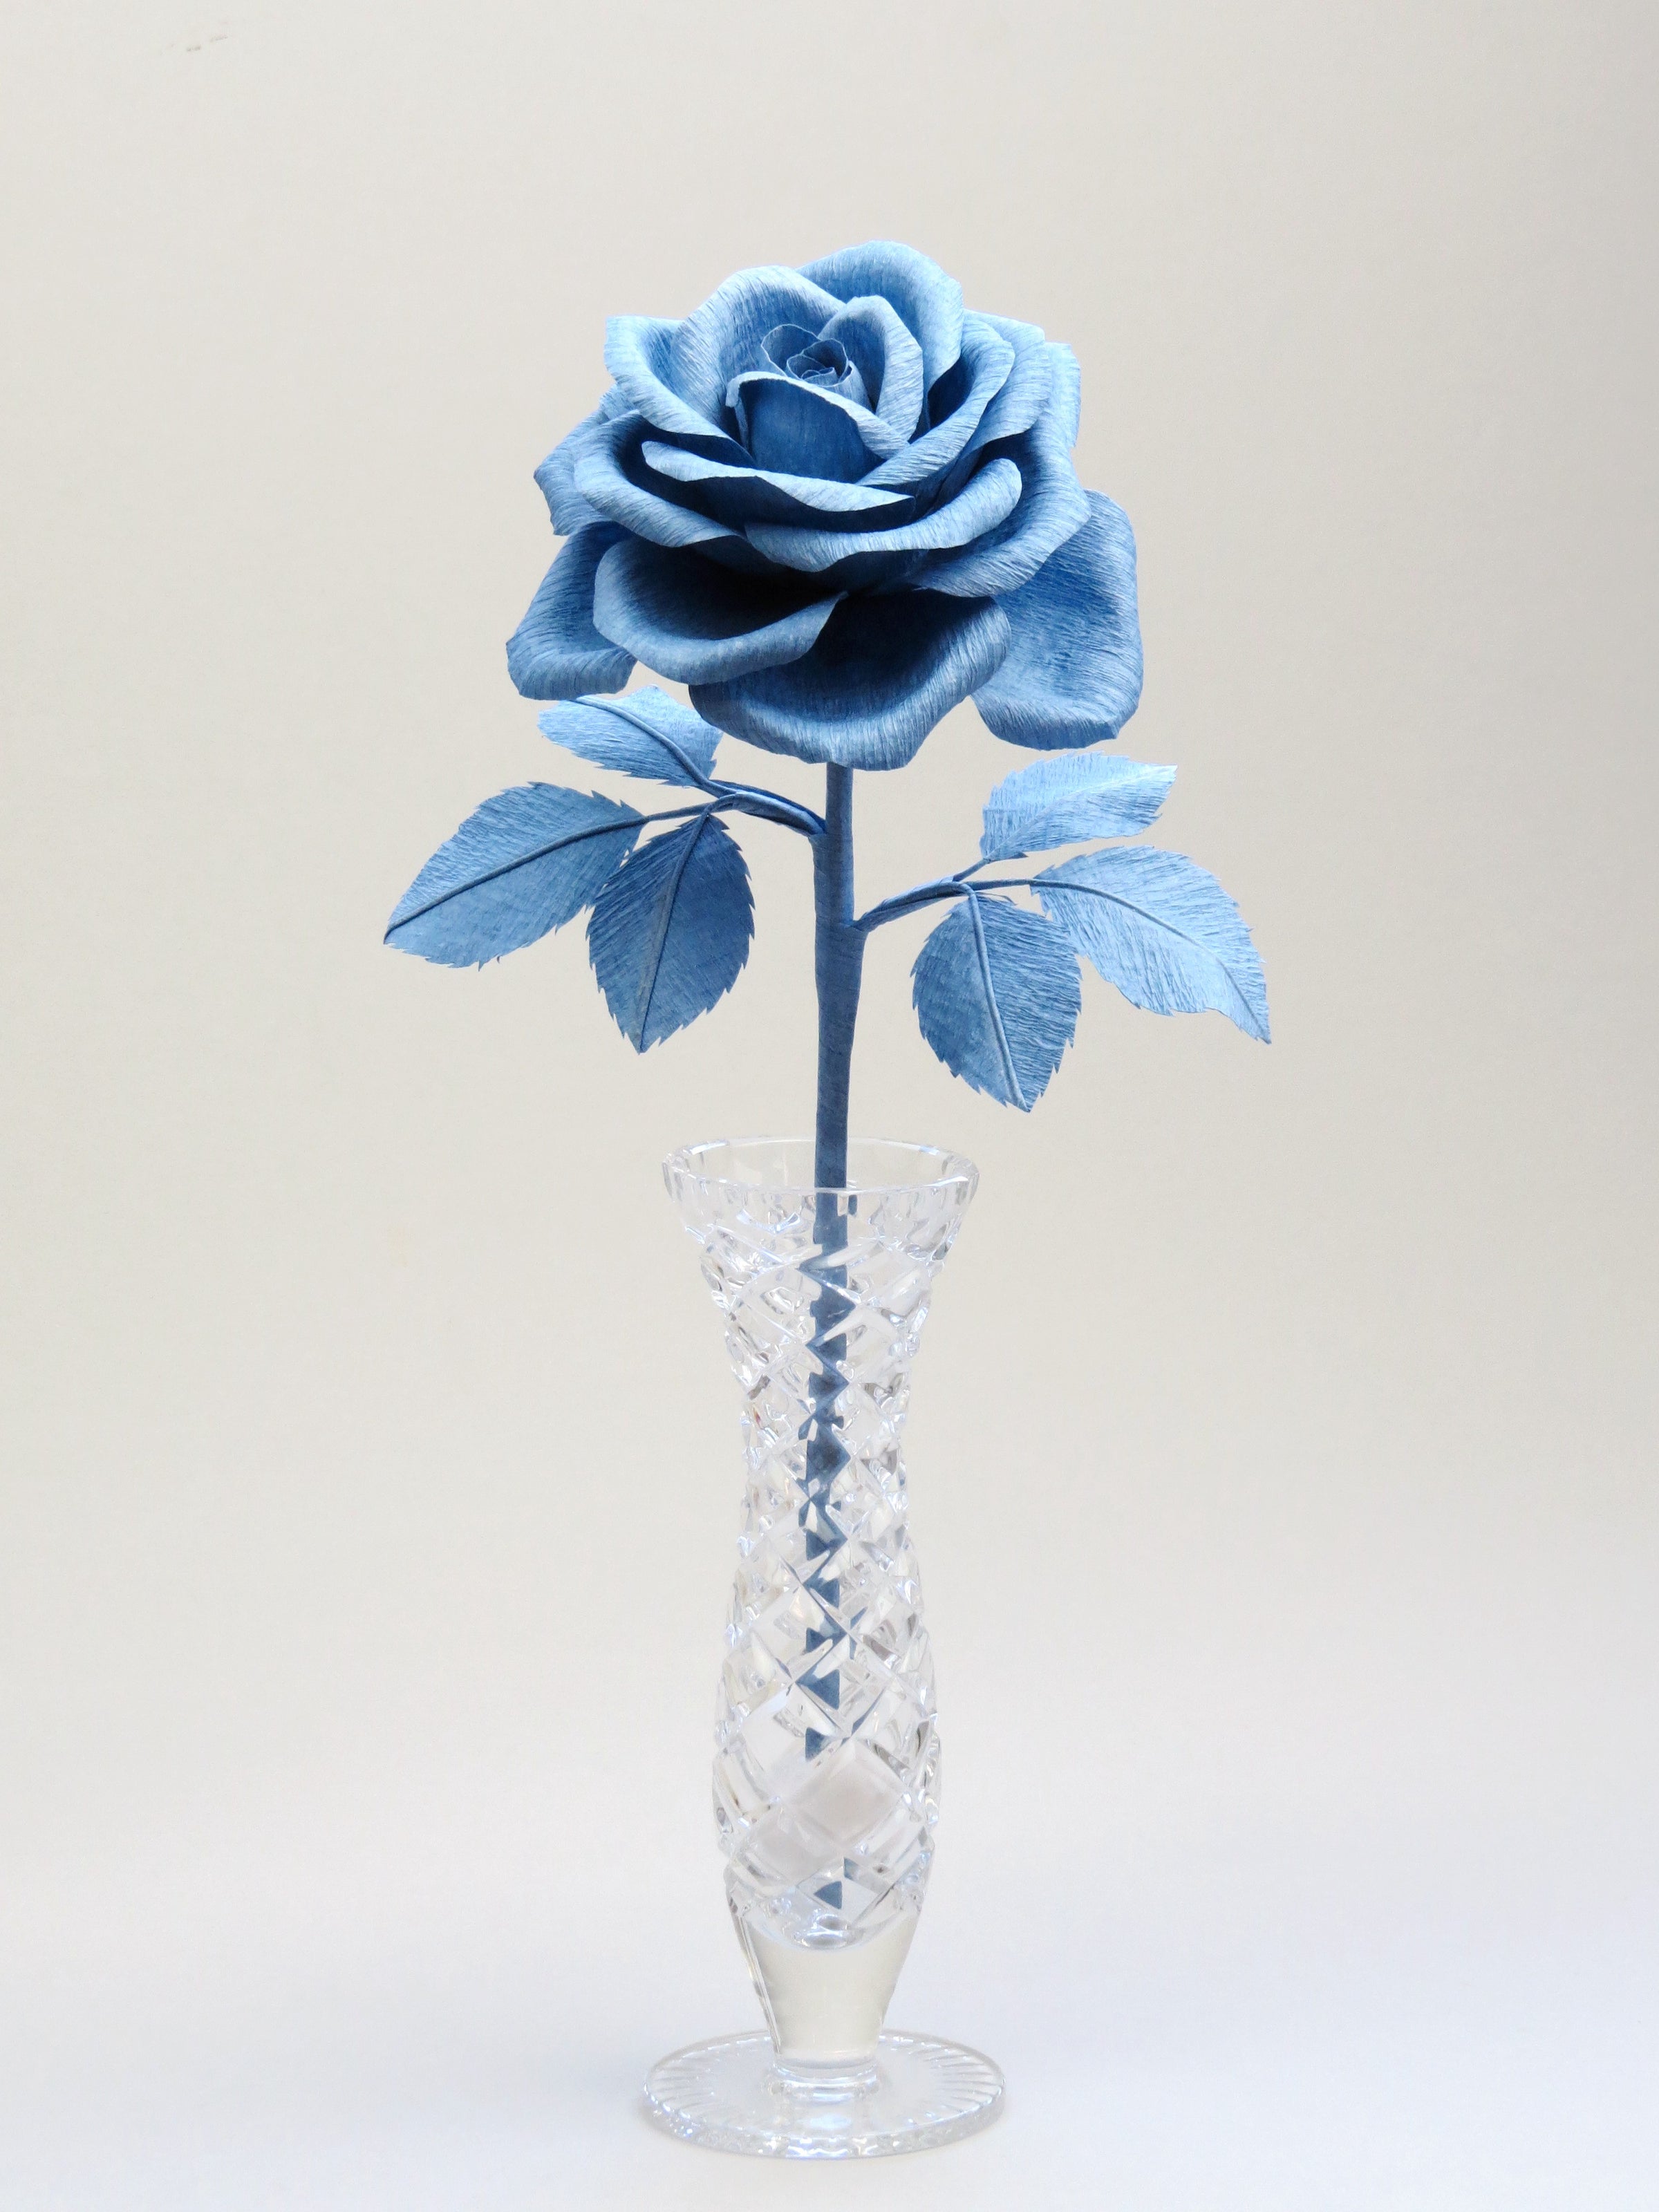 China blue crepe paper rose with six matching china blue leaves standing in a narrow glass vase set against a light grey background